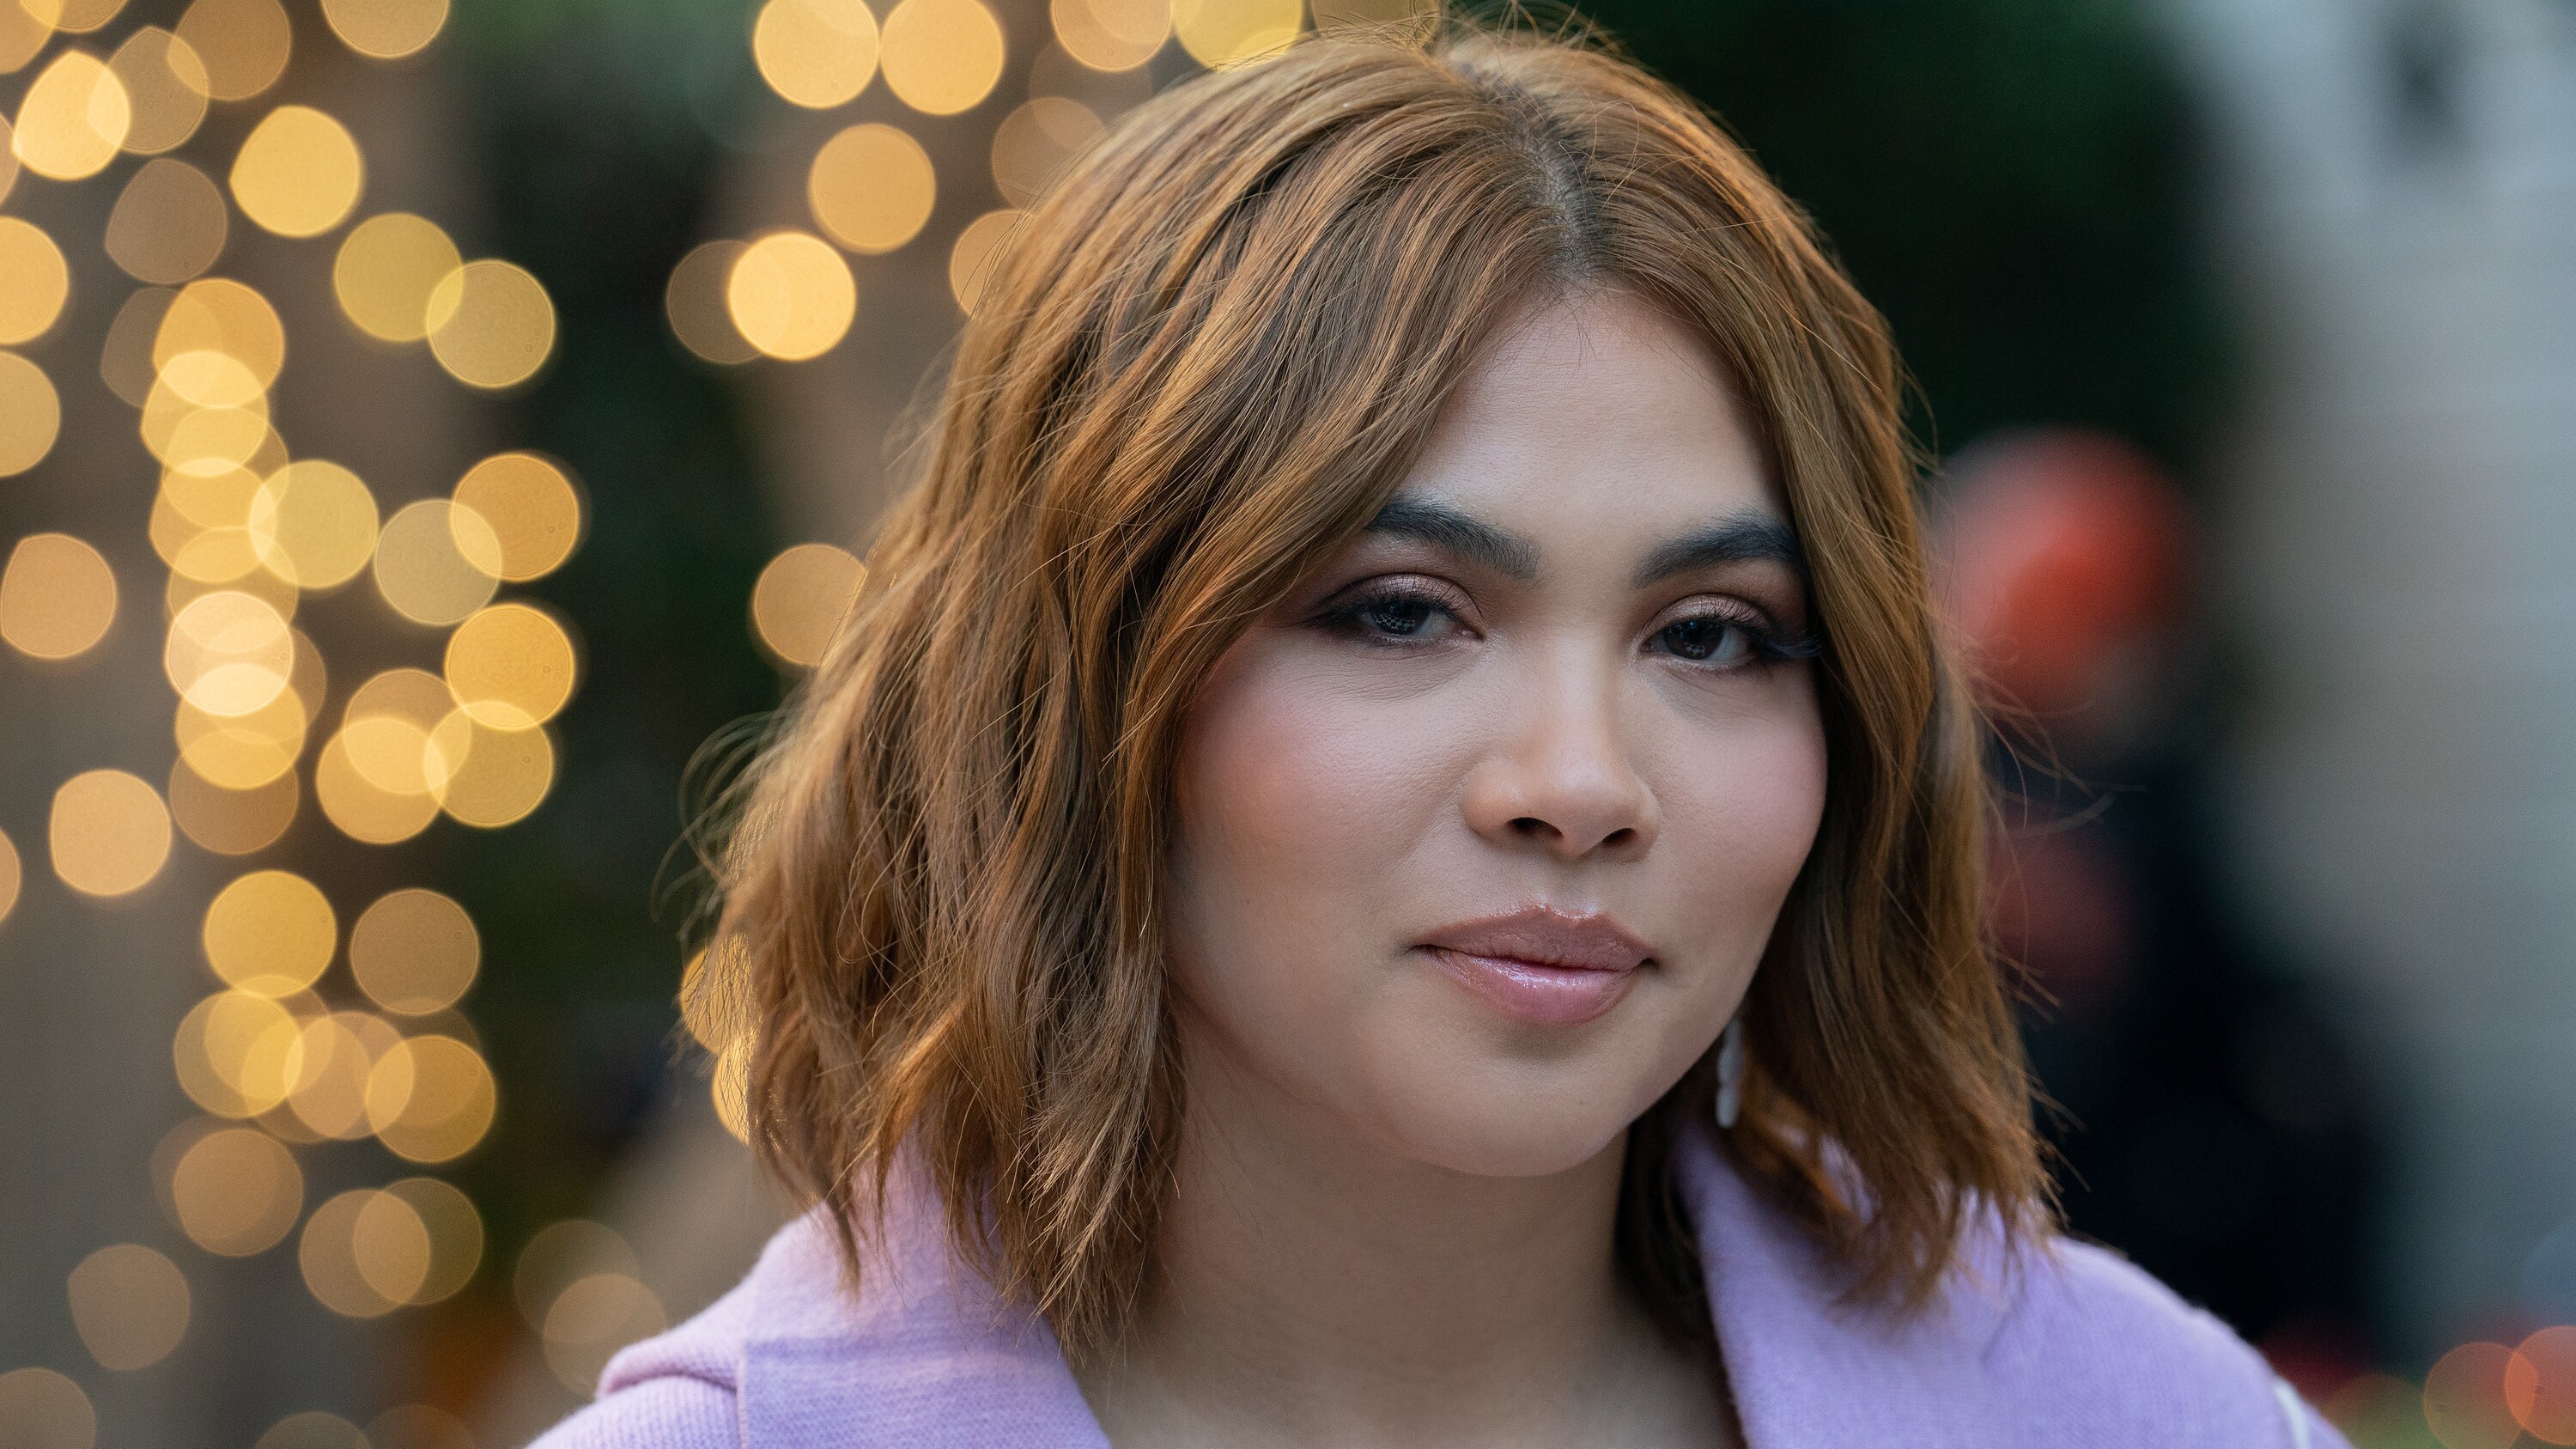 Hayley Kiyoko on Turning the Tables with Robin Roberts. In season 2 of Turning the Tables with Robin Roberts, Robin Roberts gets personal with a new group of Hollywood's iconic women as they bear witness to their incredible journeys on their path to purpose. (Disney/Ser Baffo)